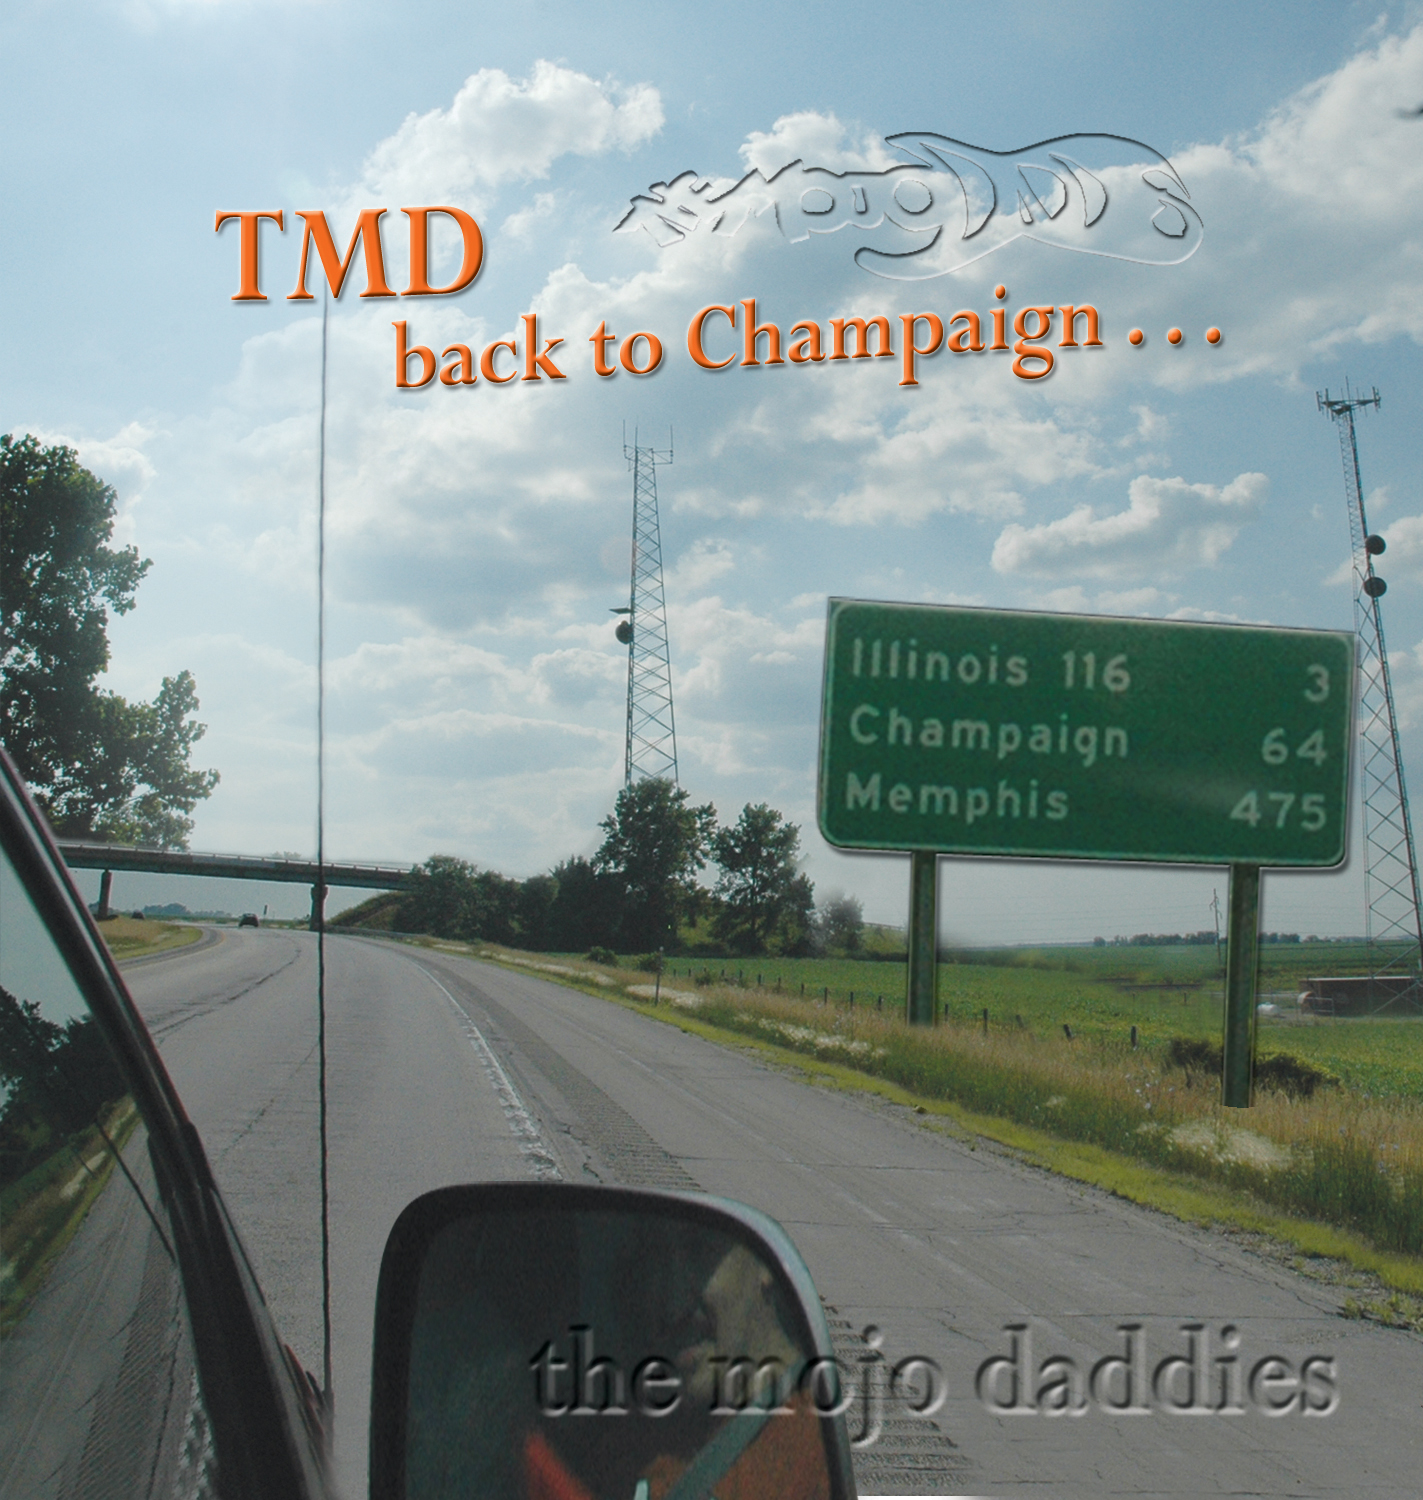 Back to Champaign cover art by Tracey Campbell